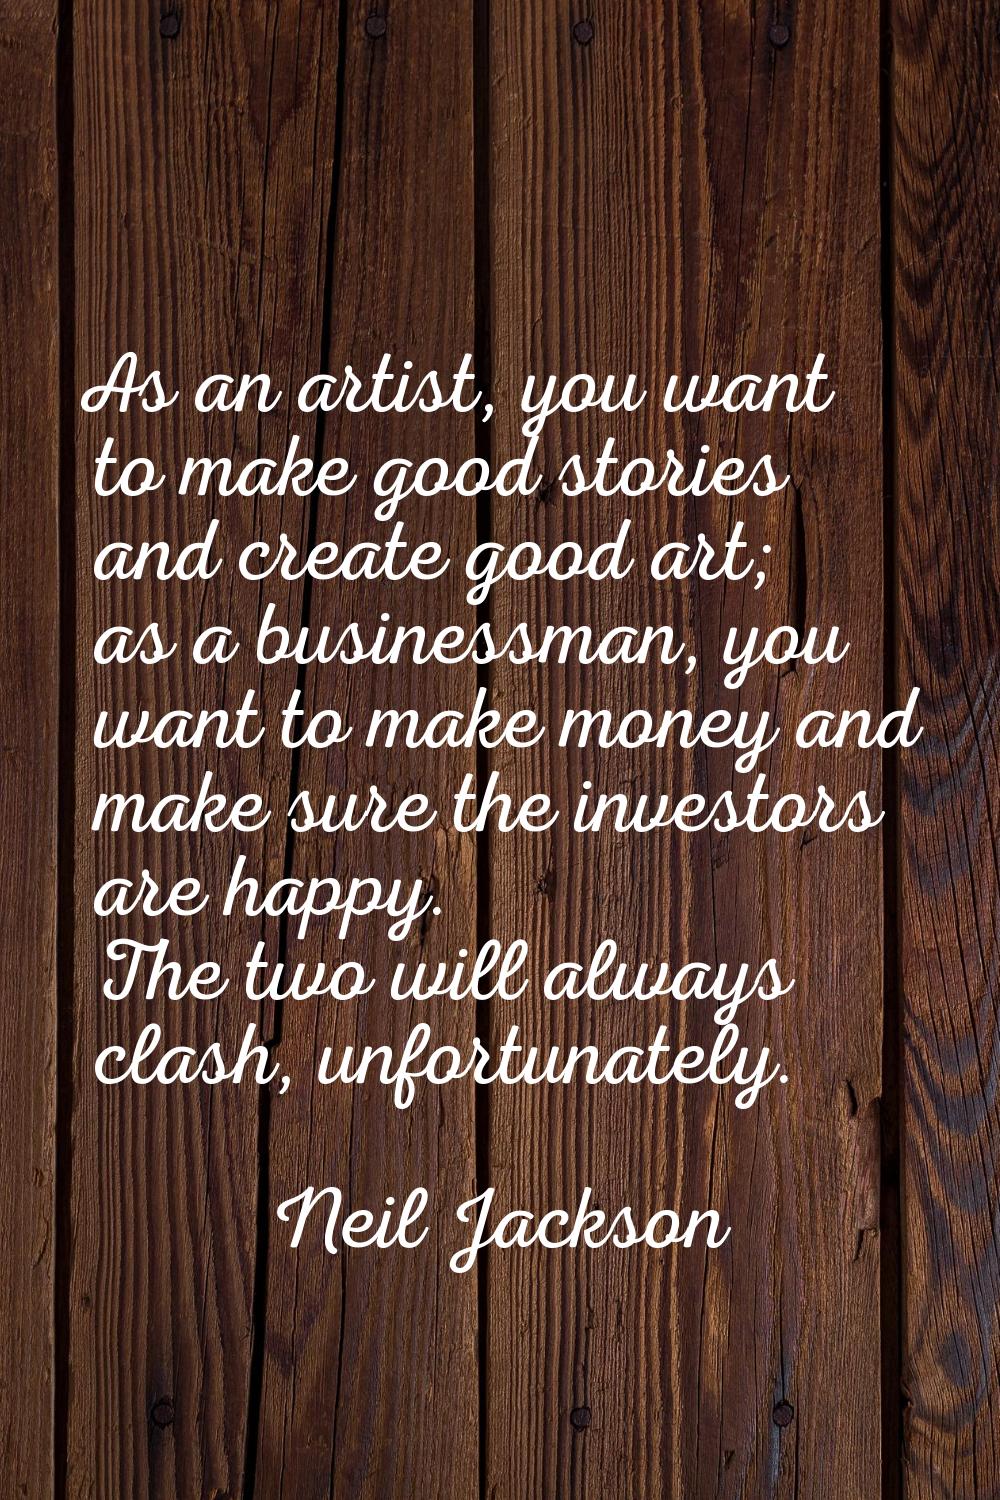 As an artist, you want to make good stories and create good art; as a businessman, you want to make